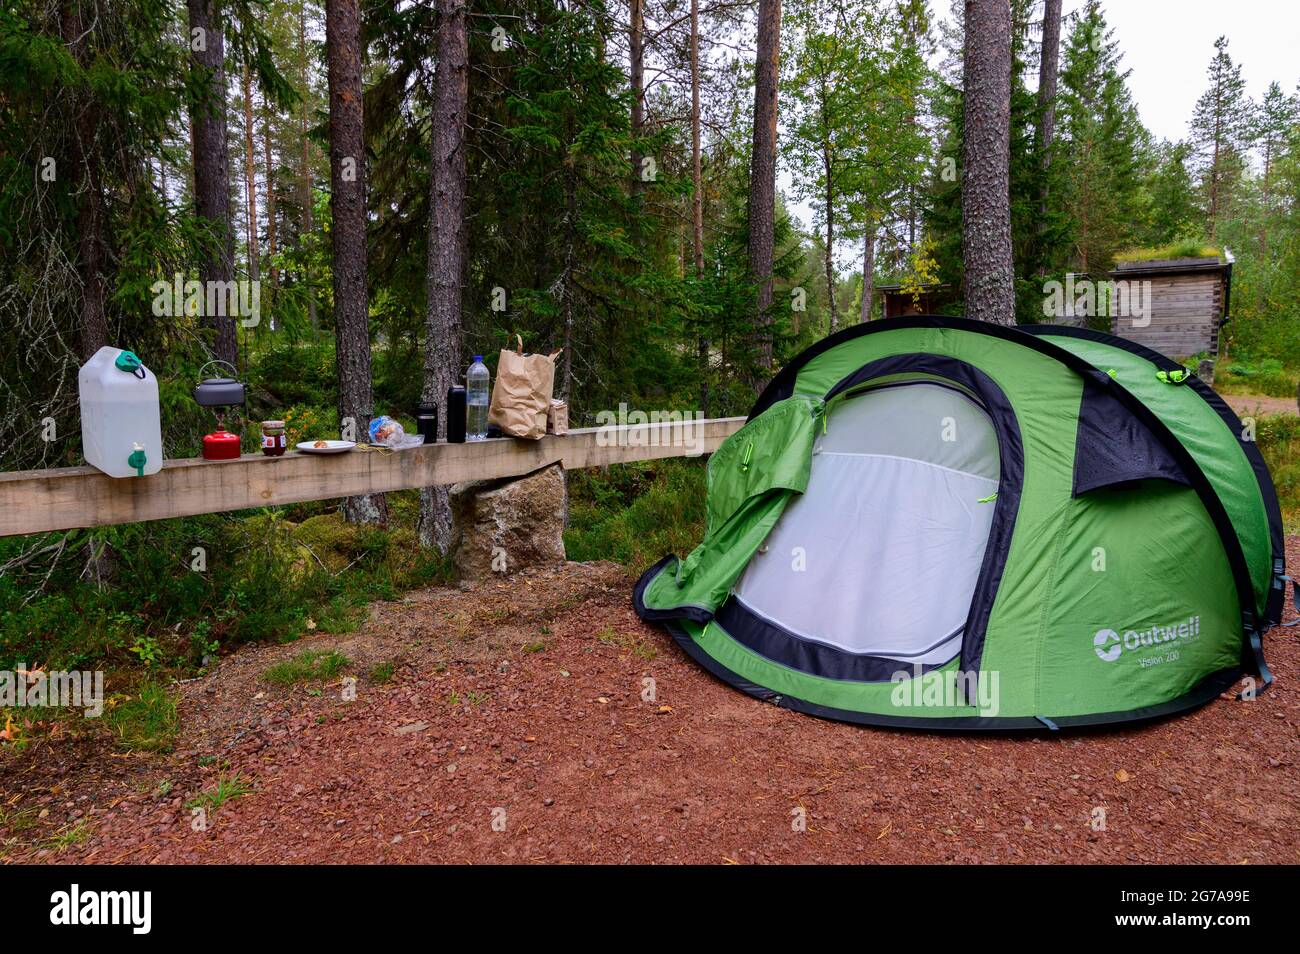 Tourist pop up tent on a parking place in Hamra National Park, Sweden Stock Photo